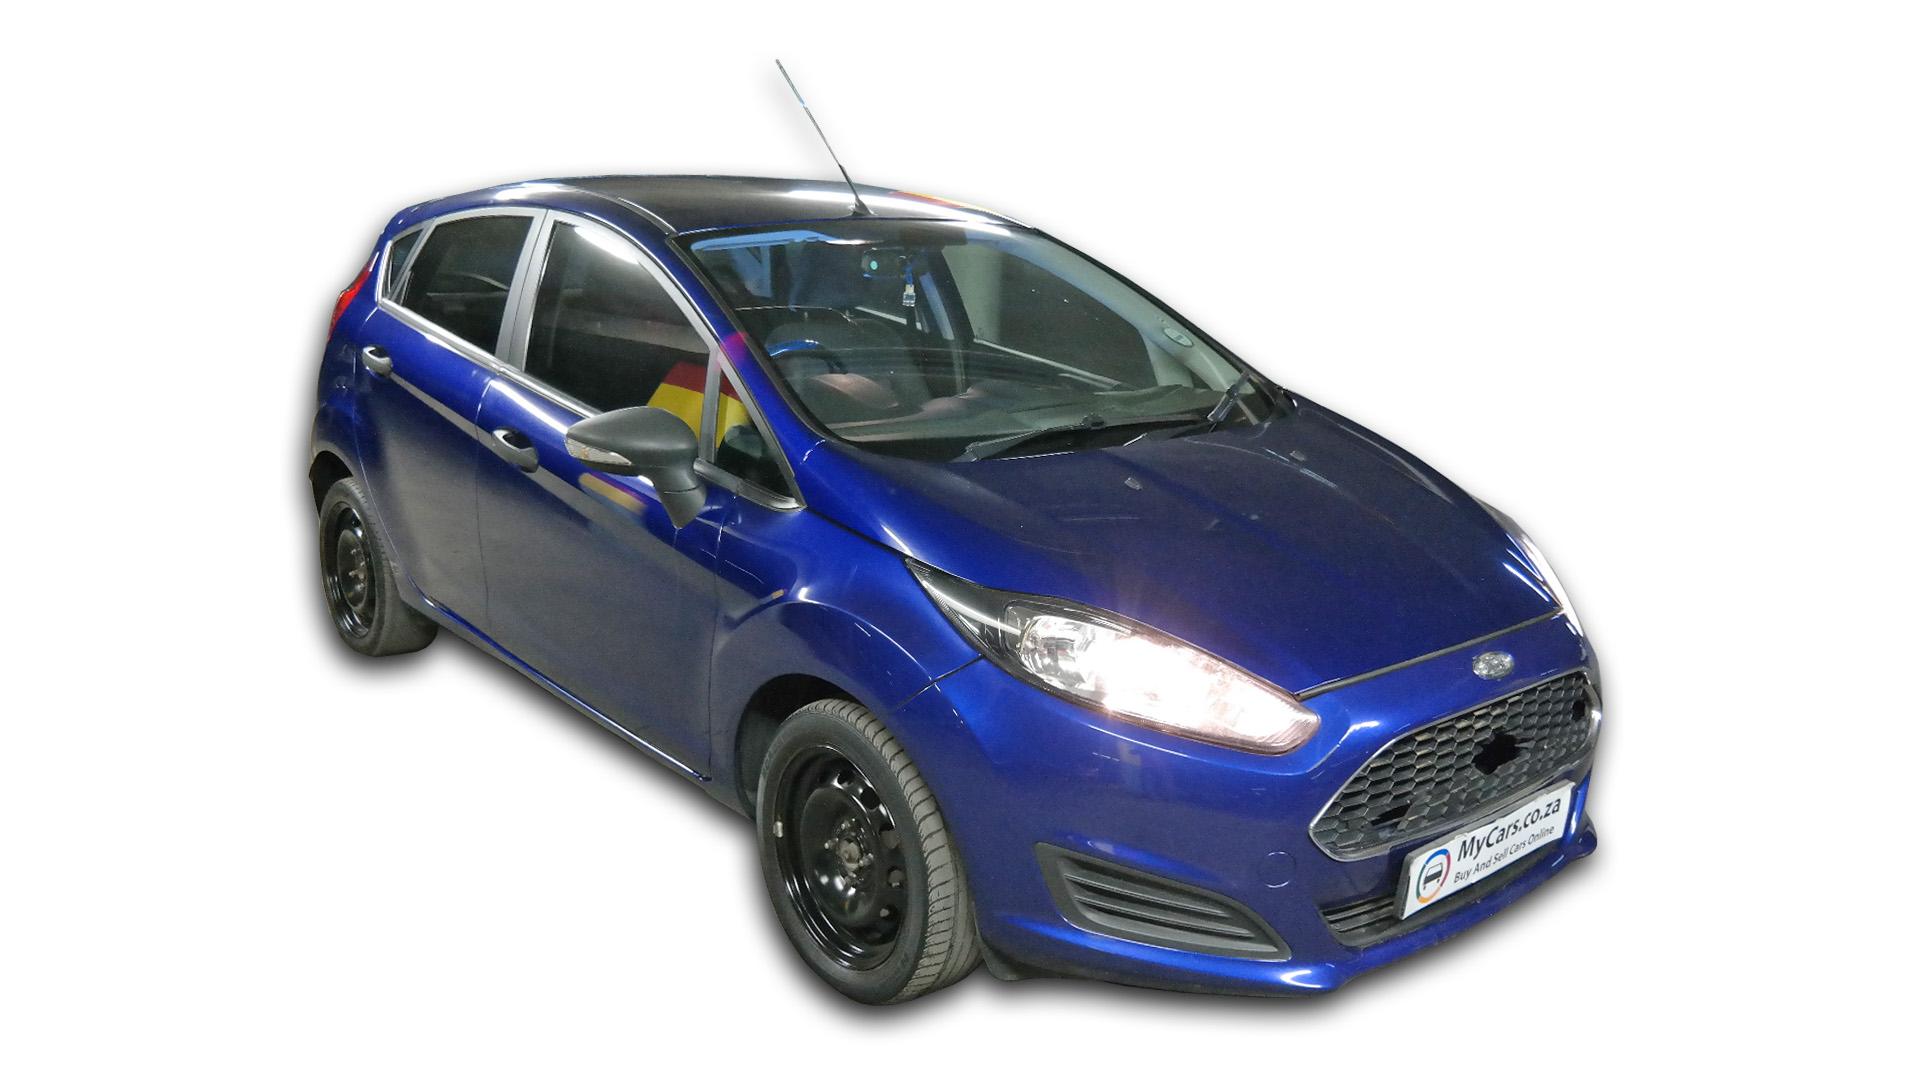 Ford Fiesta 1.4 Ambiente 5DR